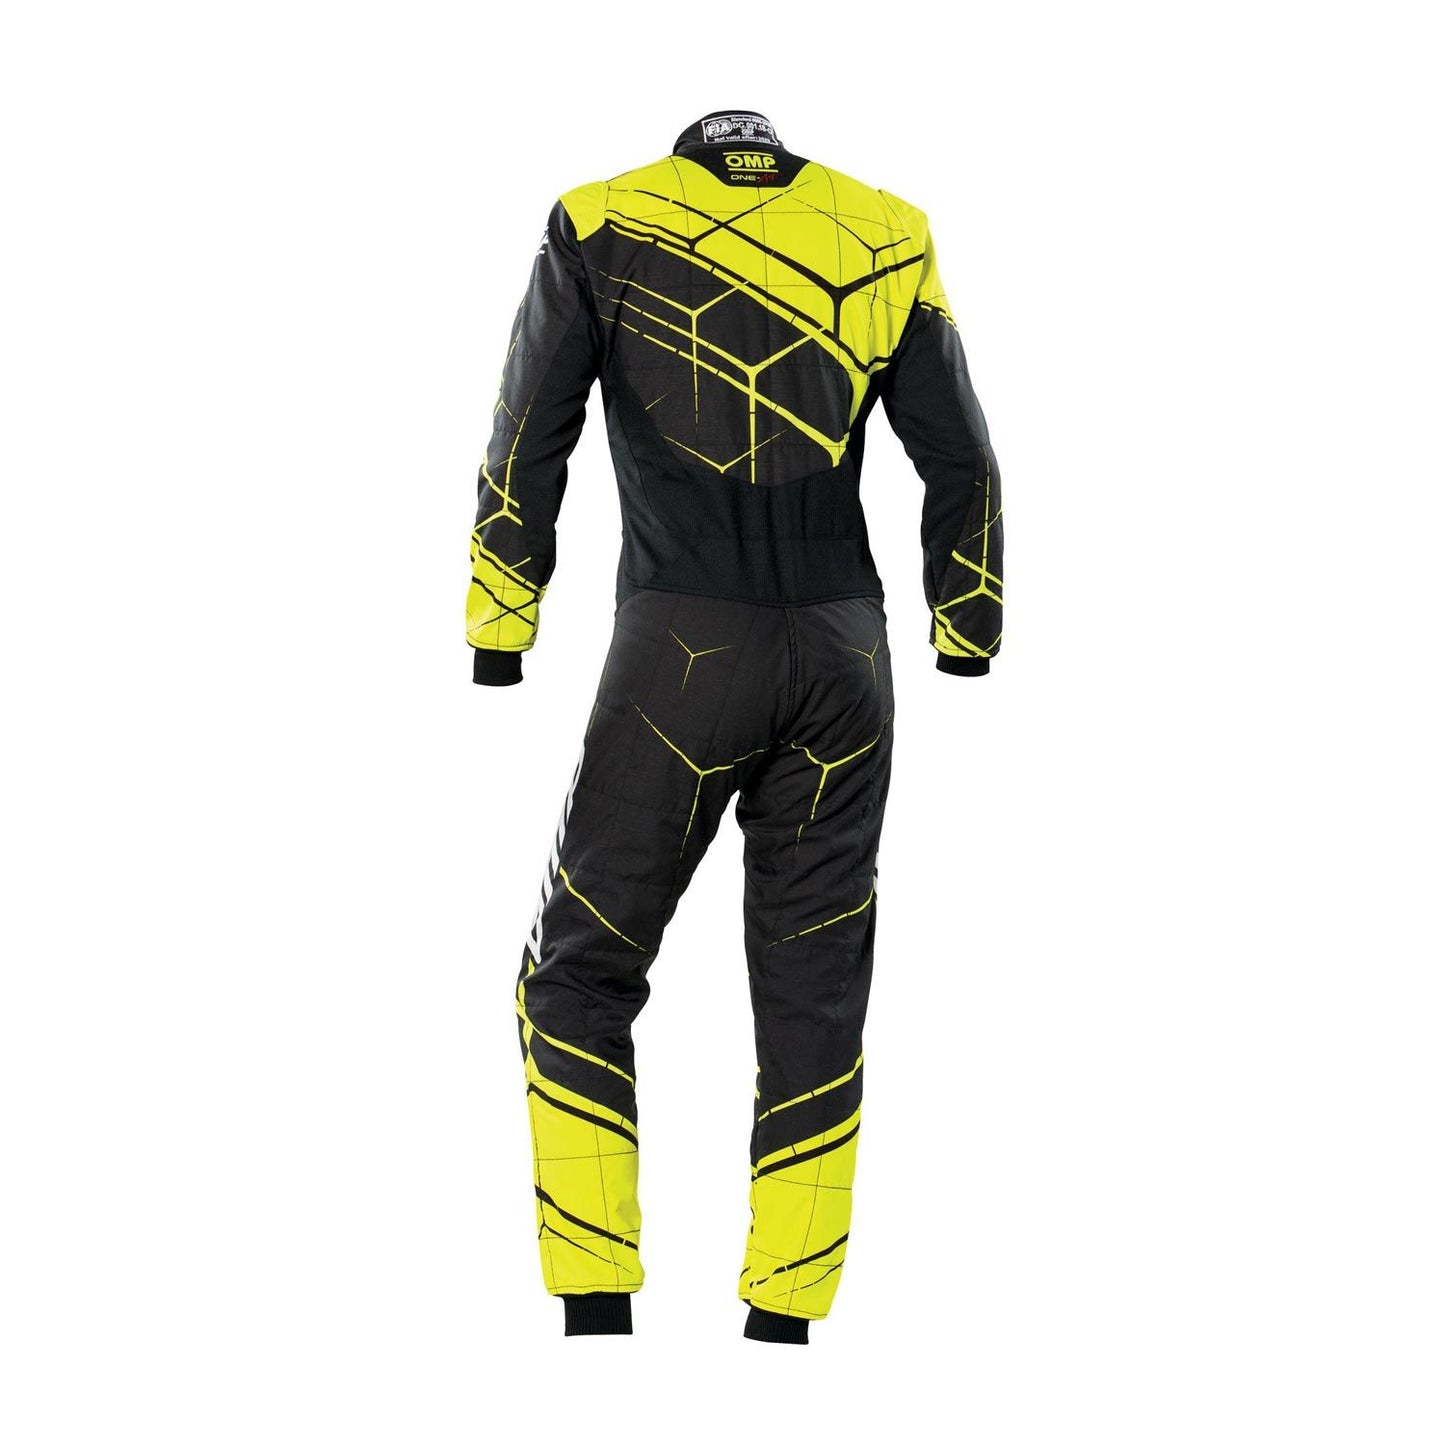 OMP Italy ONE ART MY20 Racing Suit Black/Yellow(FIA homologation)